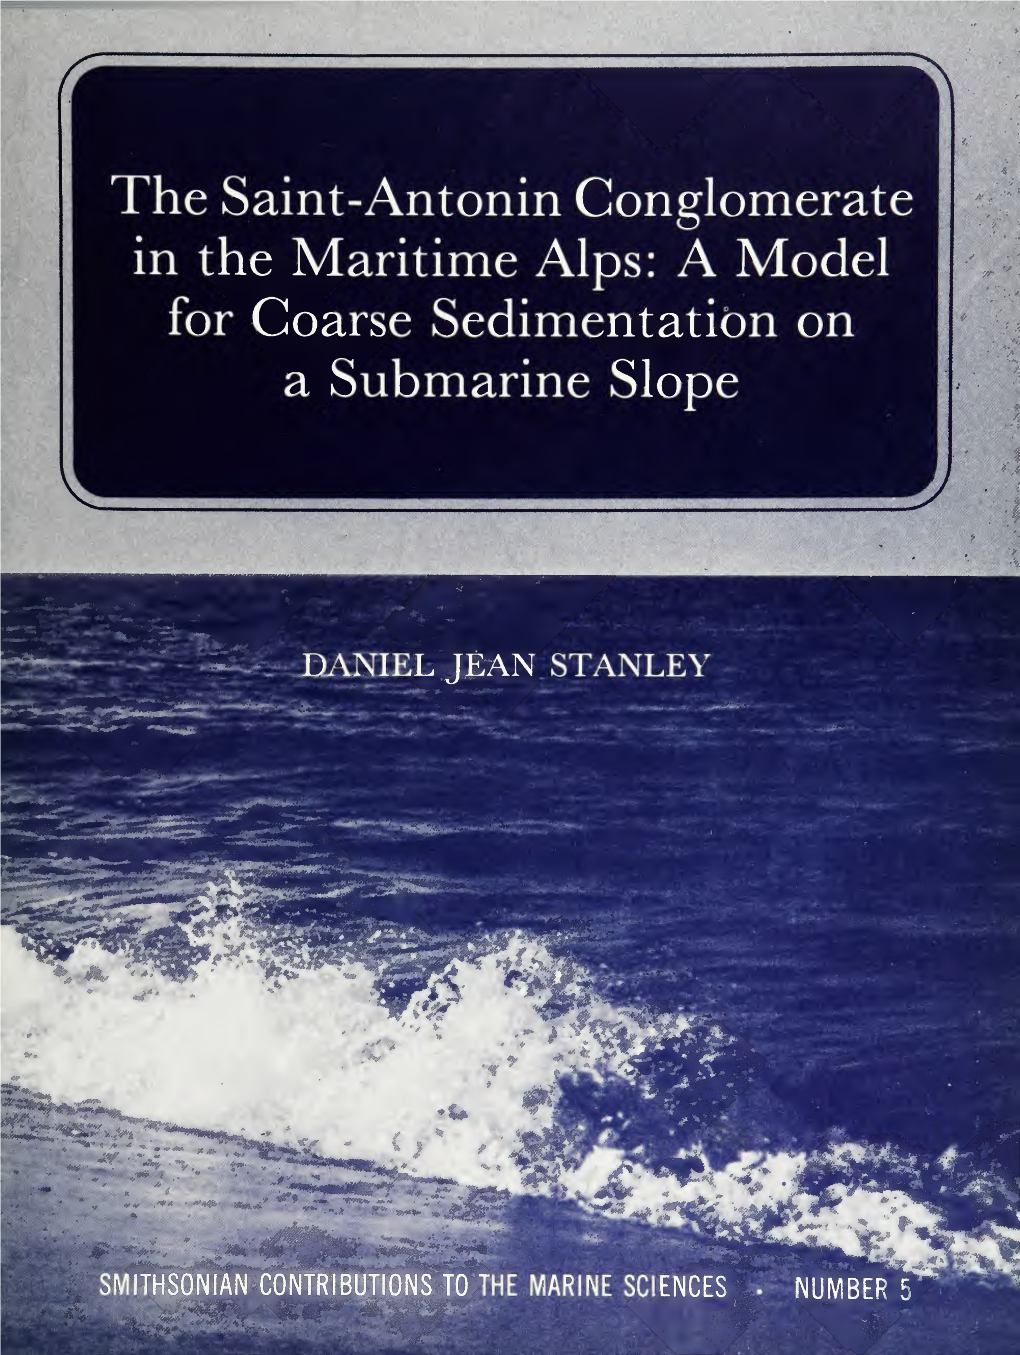 The Saint-Antonin Conglomerate in the Maritime Alps: a Model ML a Submarine Slope